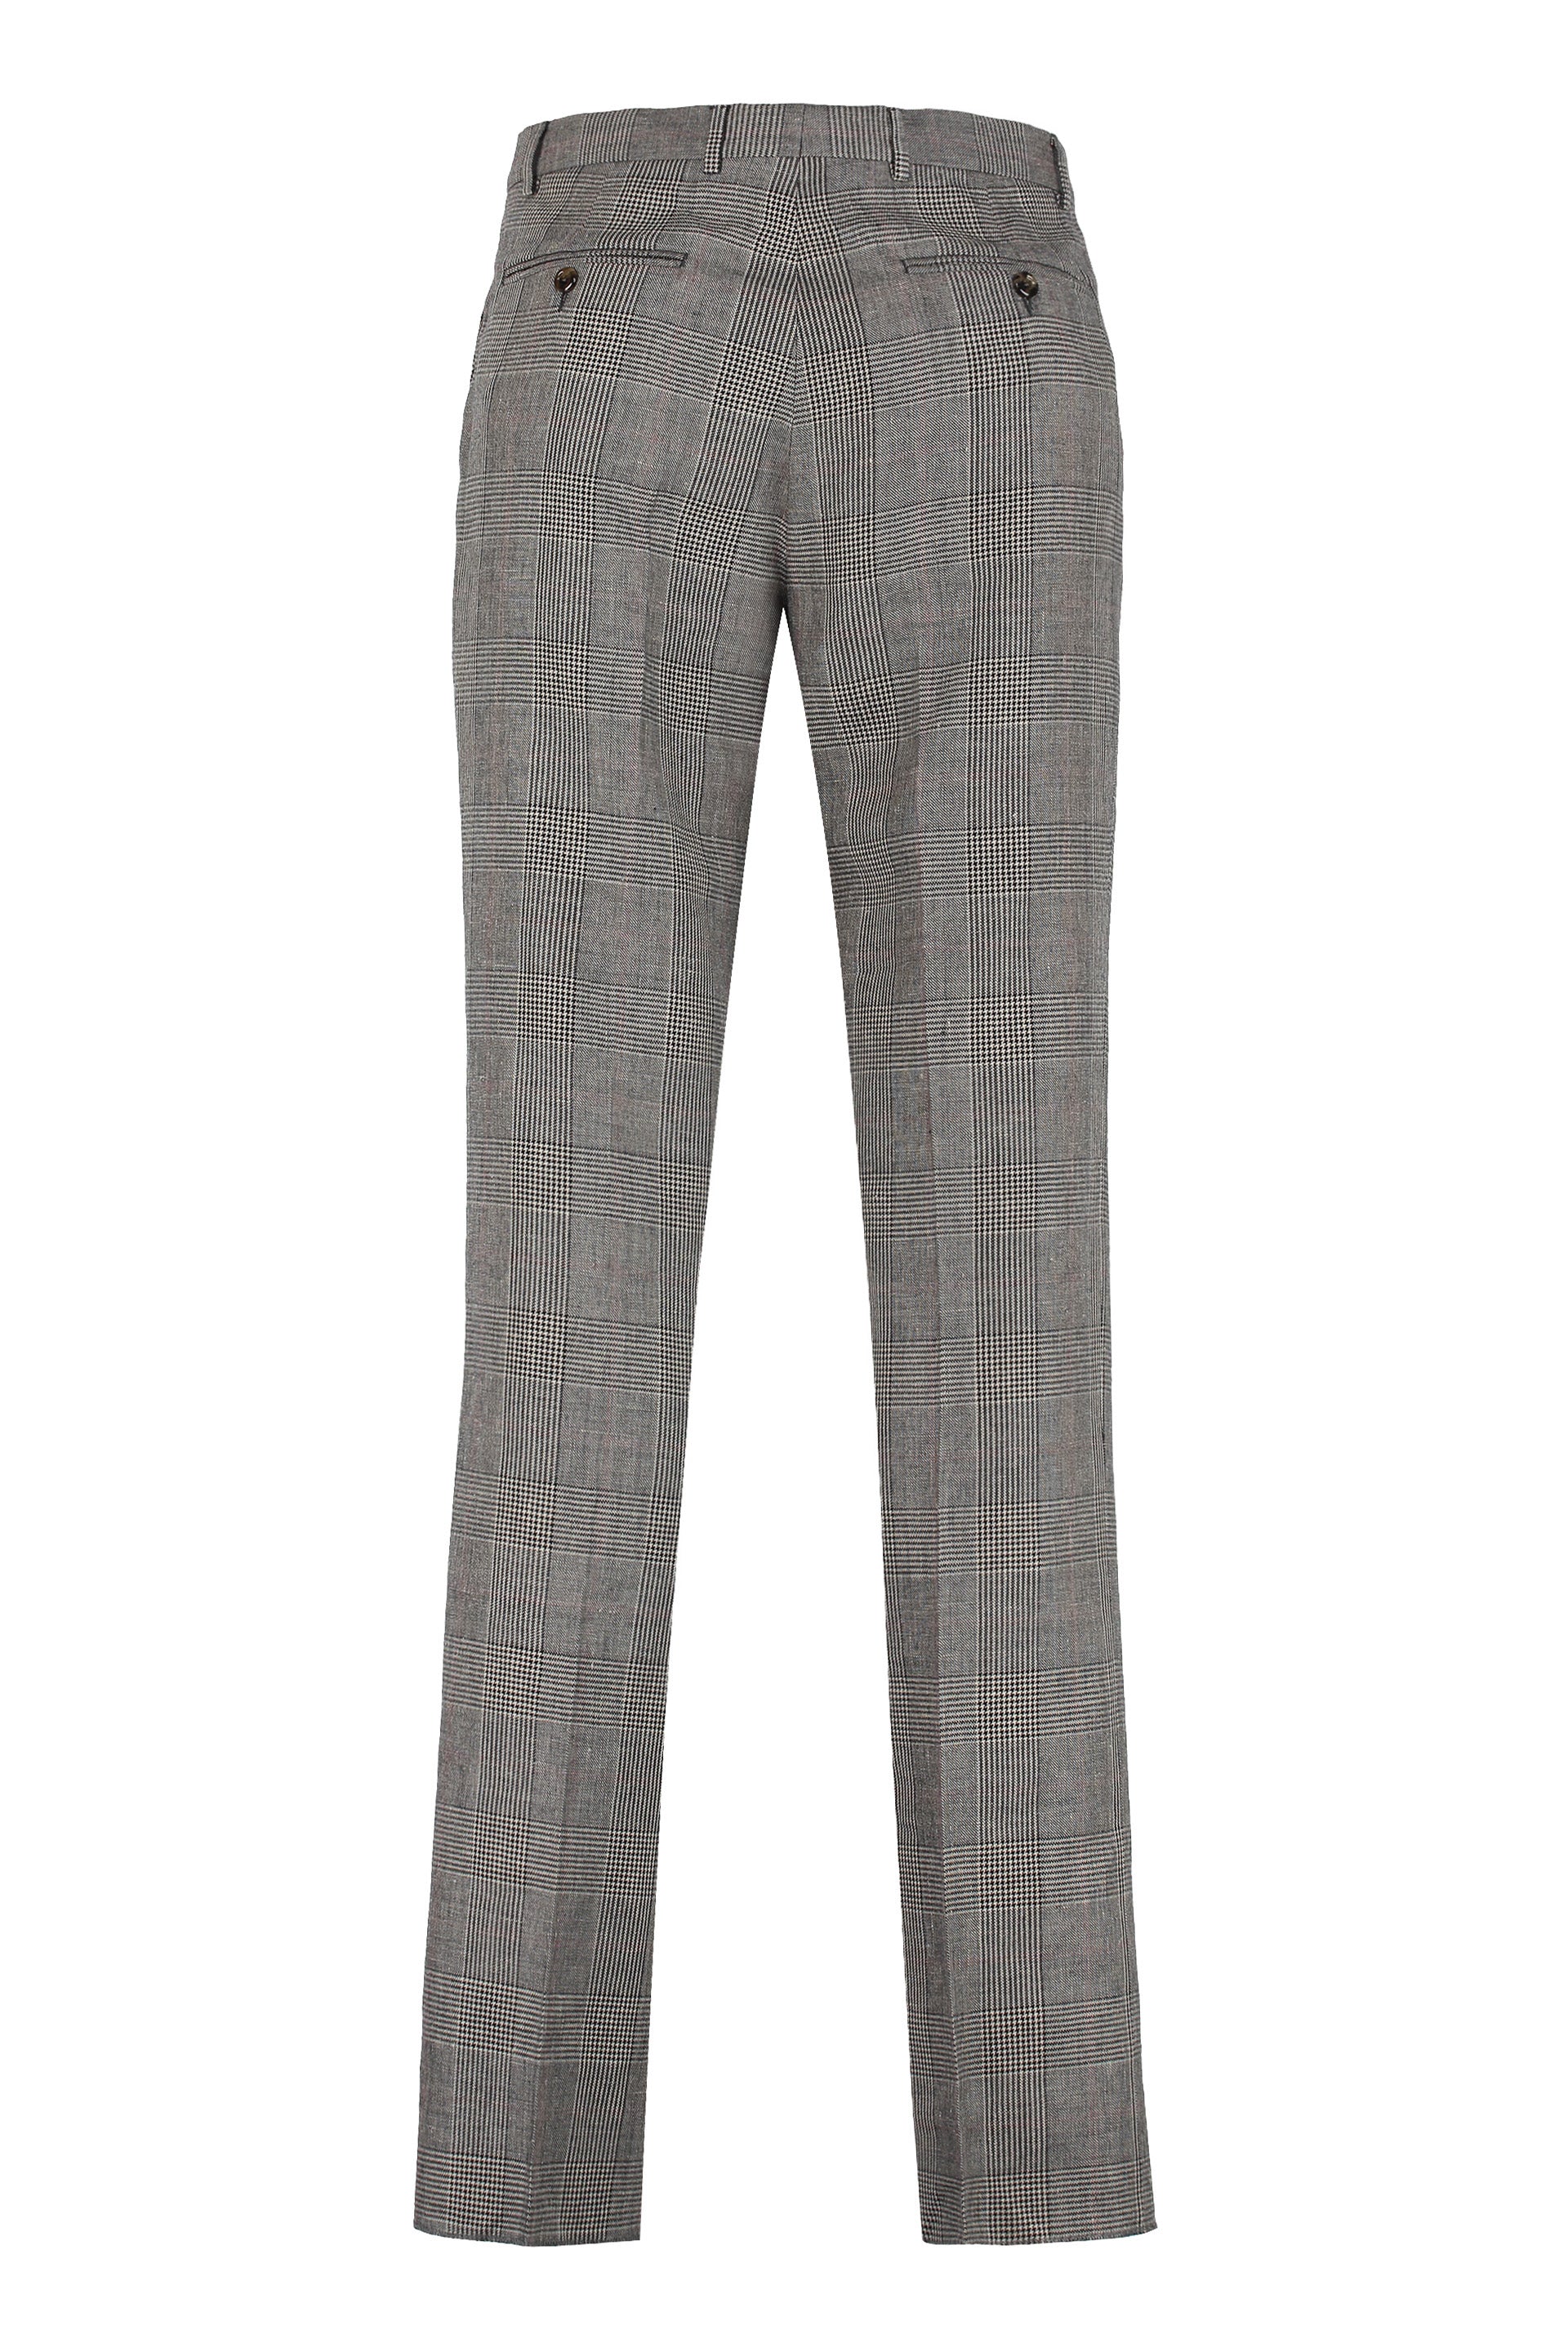 Shop Gucci Tailored Grey Checkered Trousers For Men